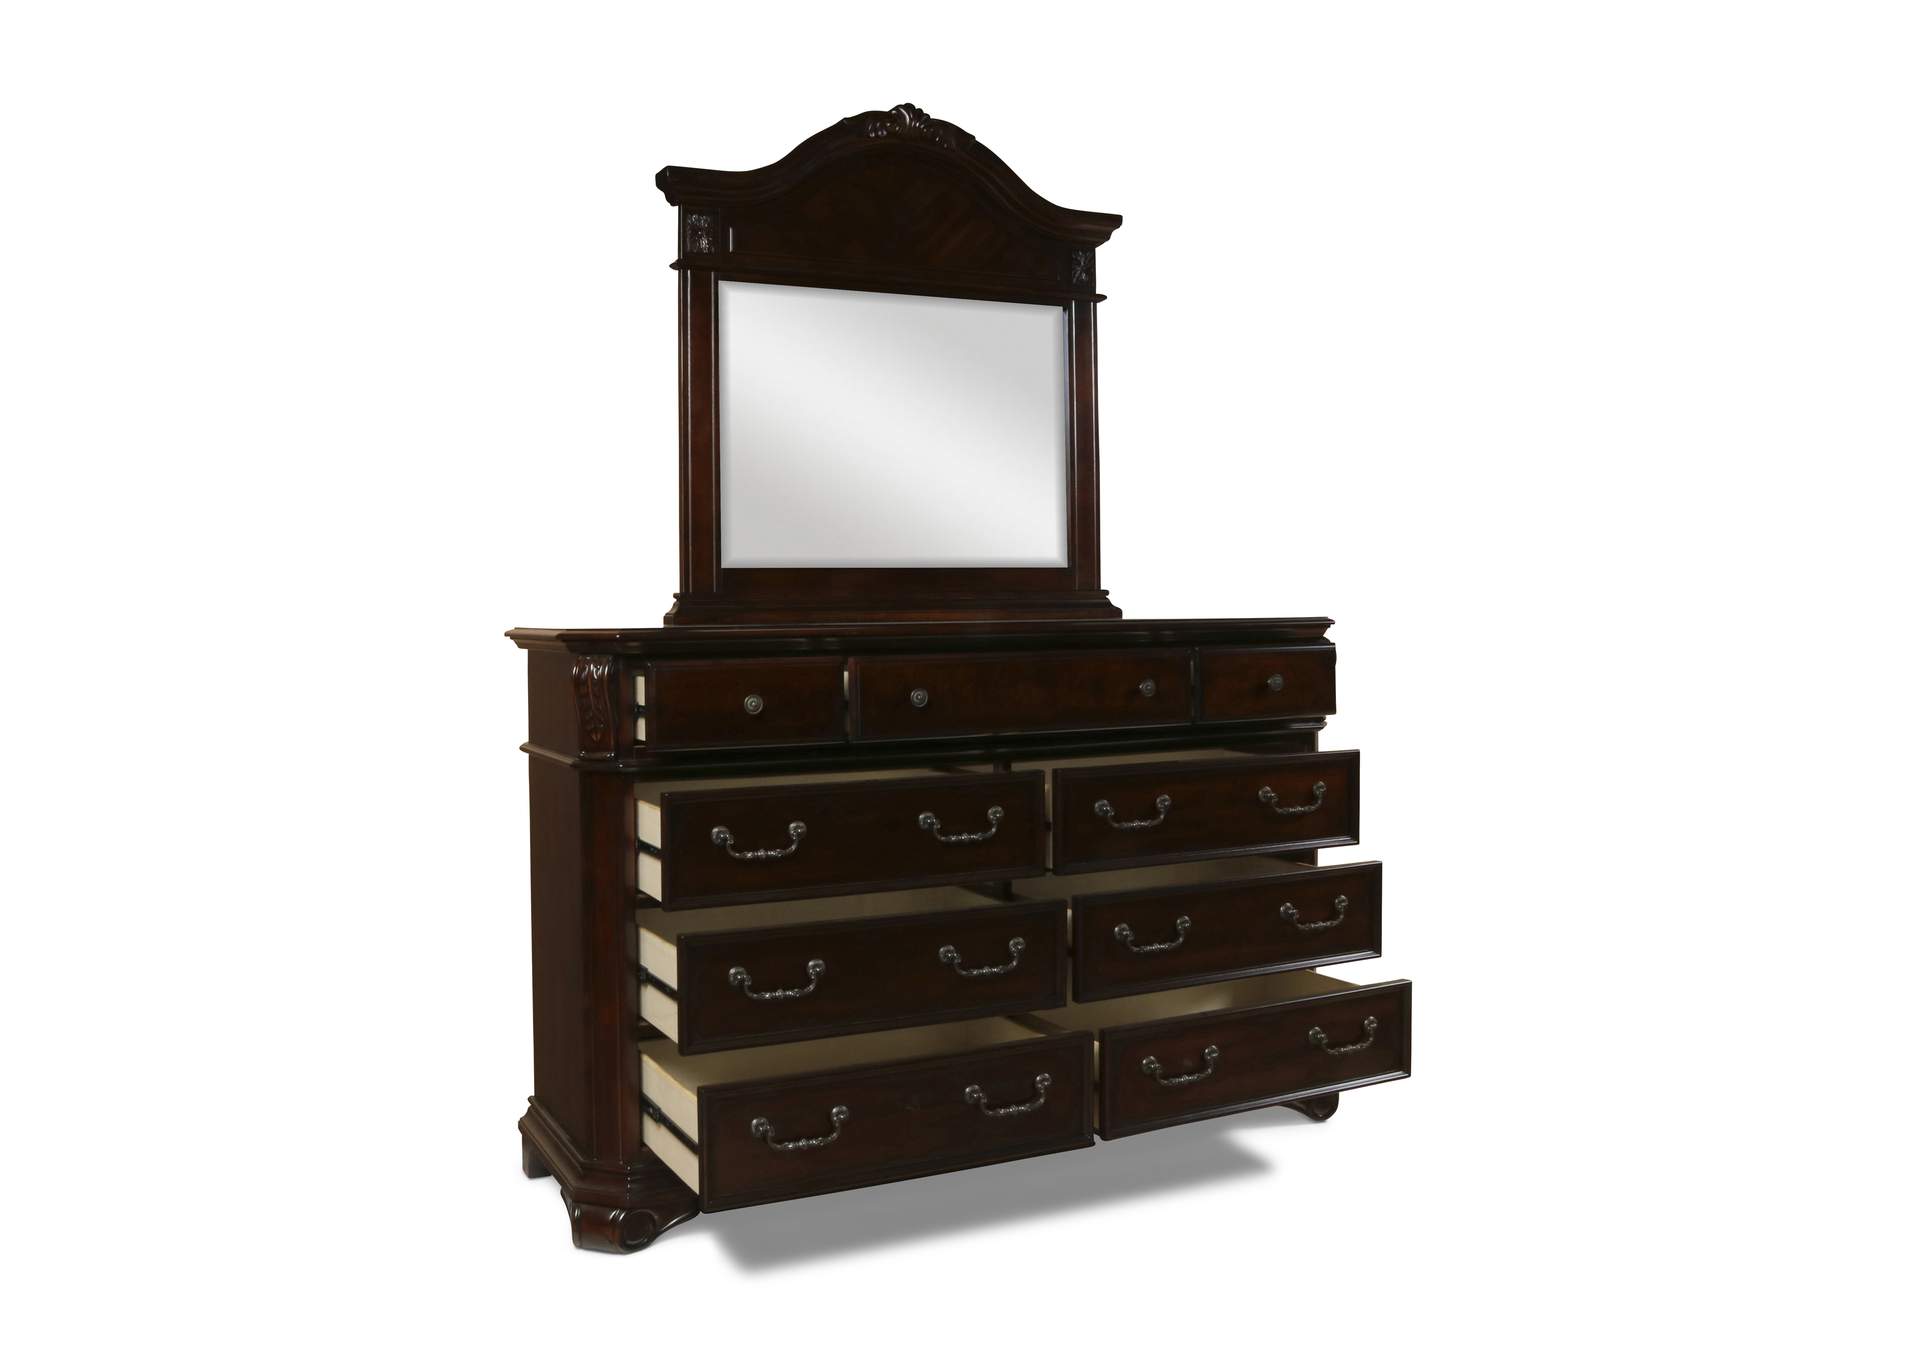 Emilie Tudor Brown Dresser and Mirror,New Classic